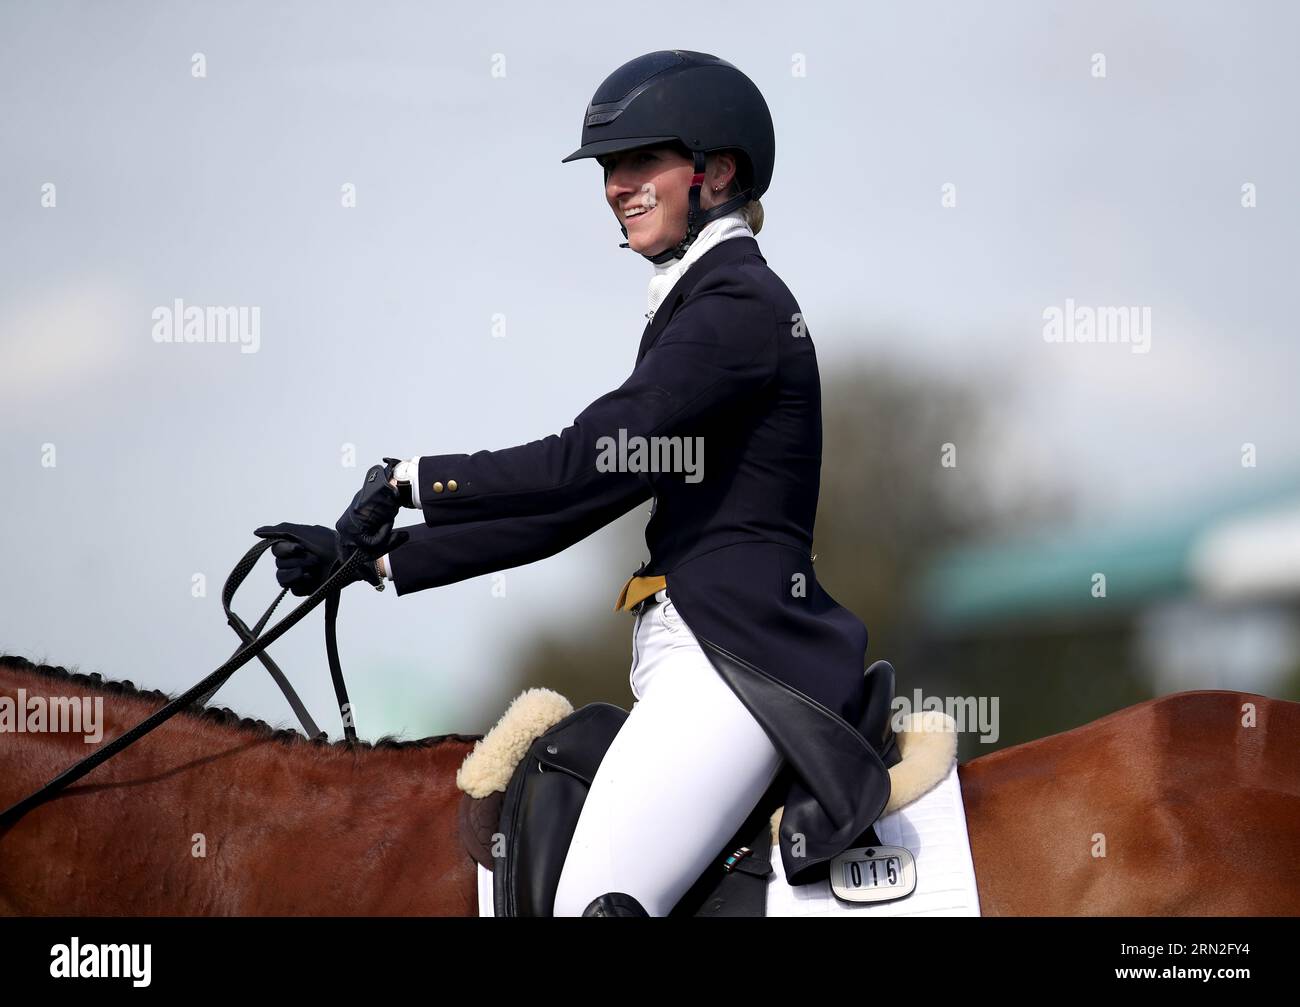 Greta Mason on Cooley For Sure compete in the Dressage on day one of the 2023 Defender Burghley Horse Trials in Stamford, Lincolnshire. Picture date: Thursday August 31, 2023. Stock Photo